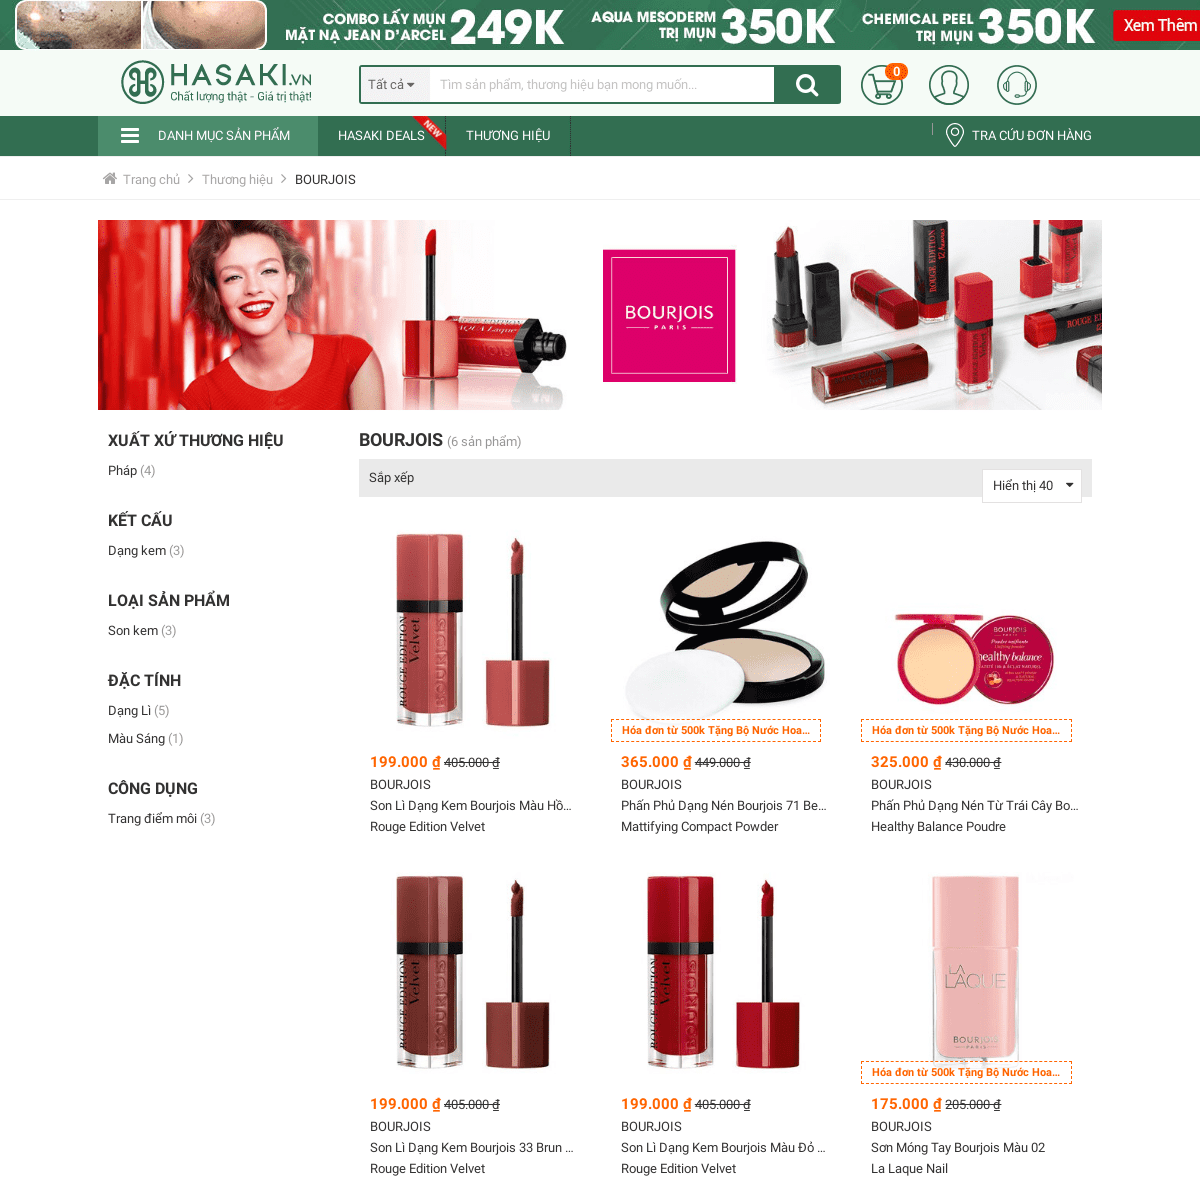 A complete backup of https://hasaki.vn/thuong-hieu/bourjois.html